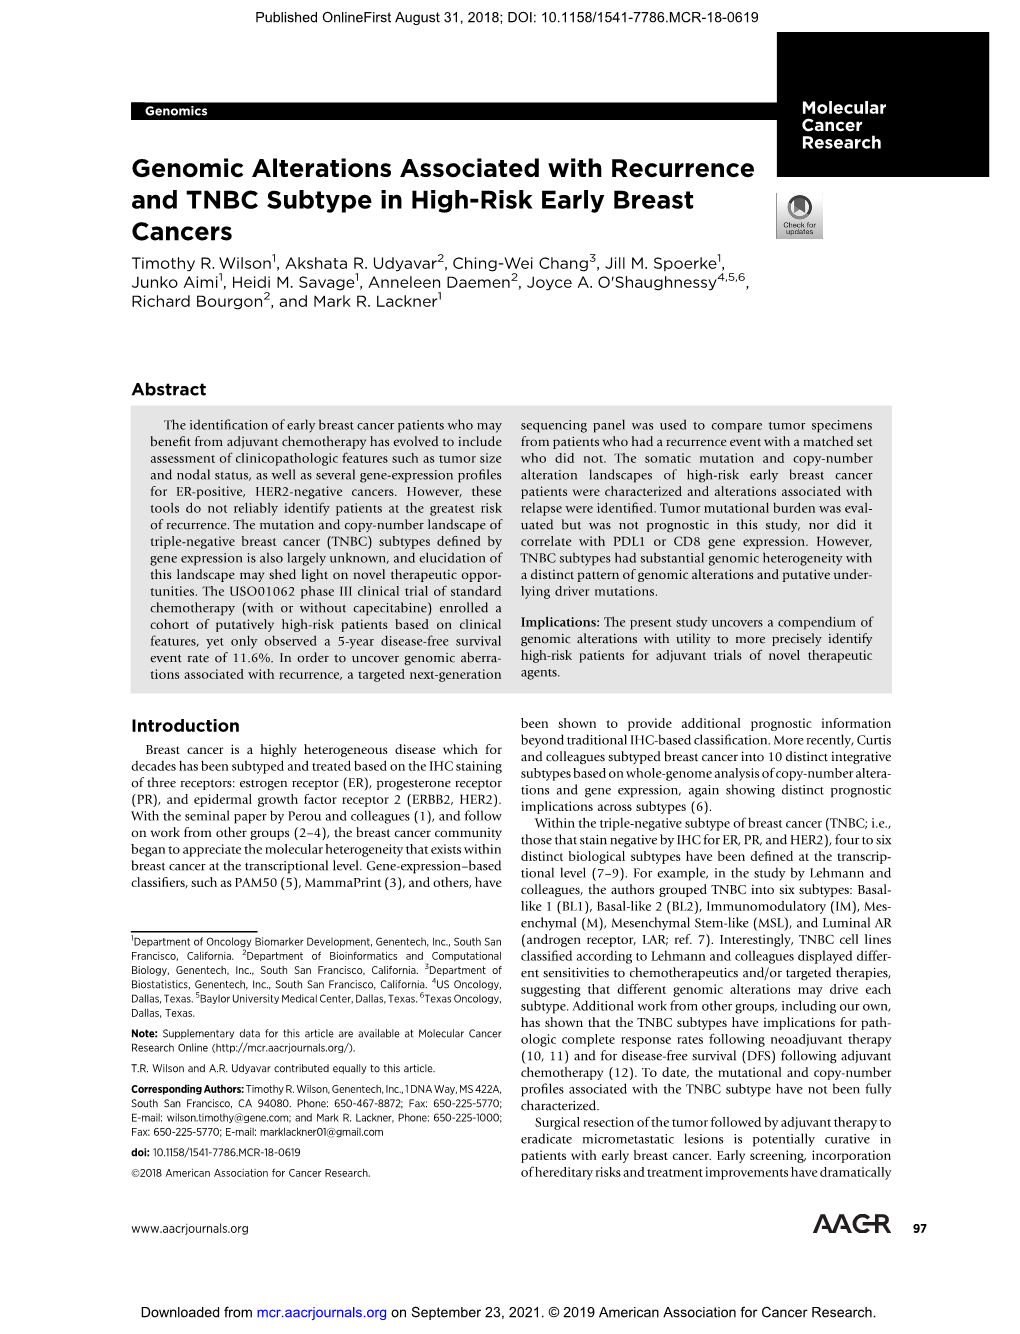 Genomic Alterations Associated with Recurrence and TNBC Subtype in High-Risk Early Breast Cancers Timothy R